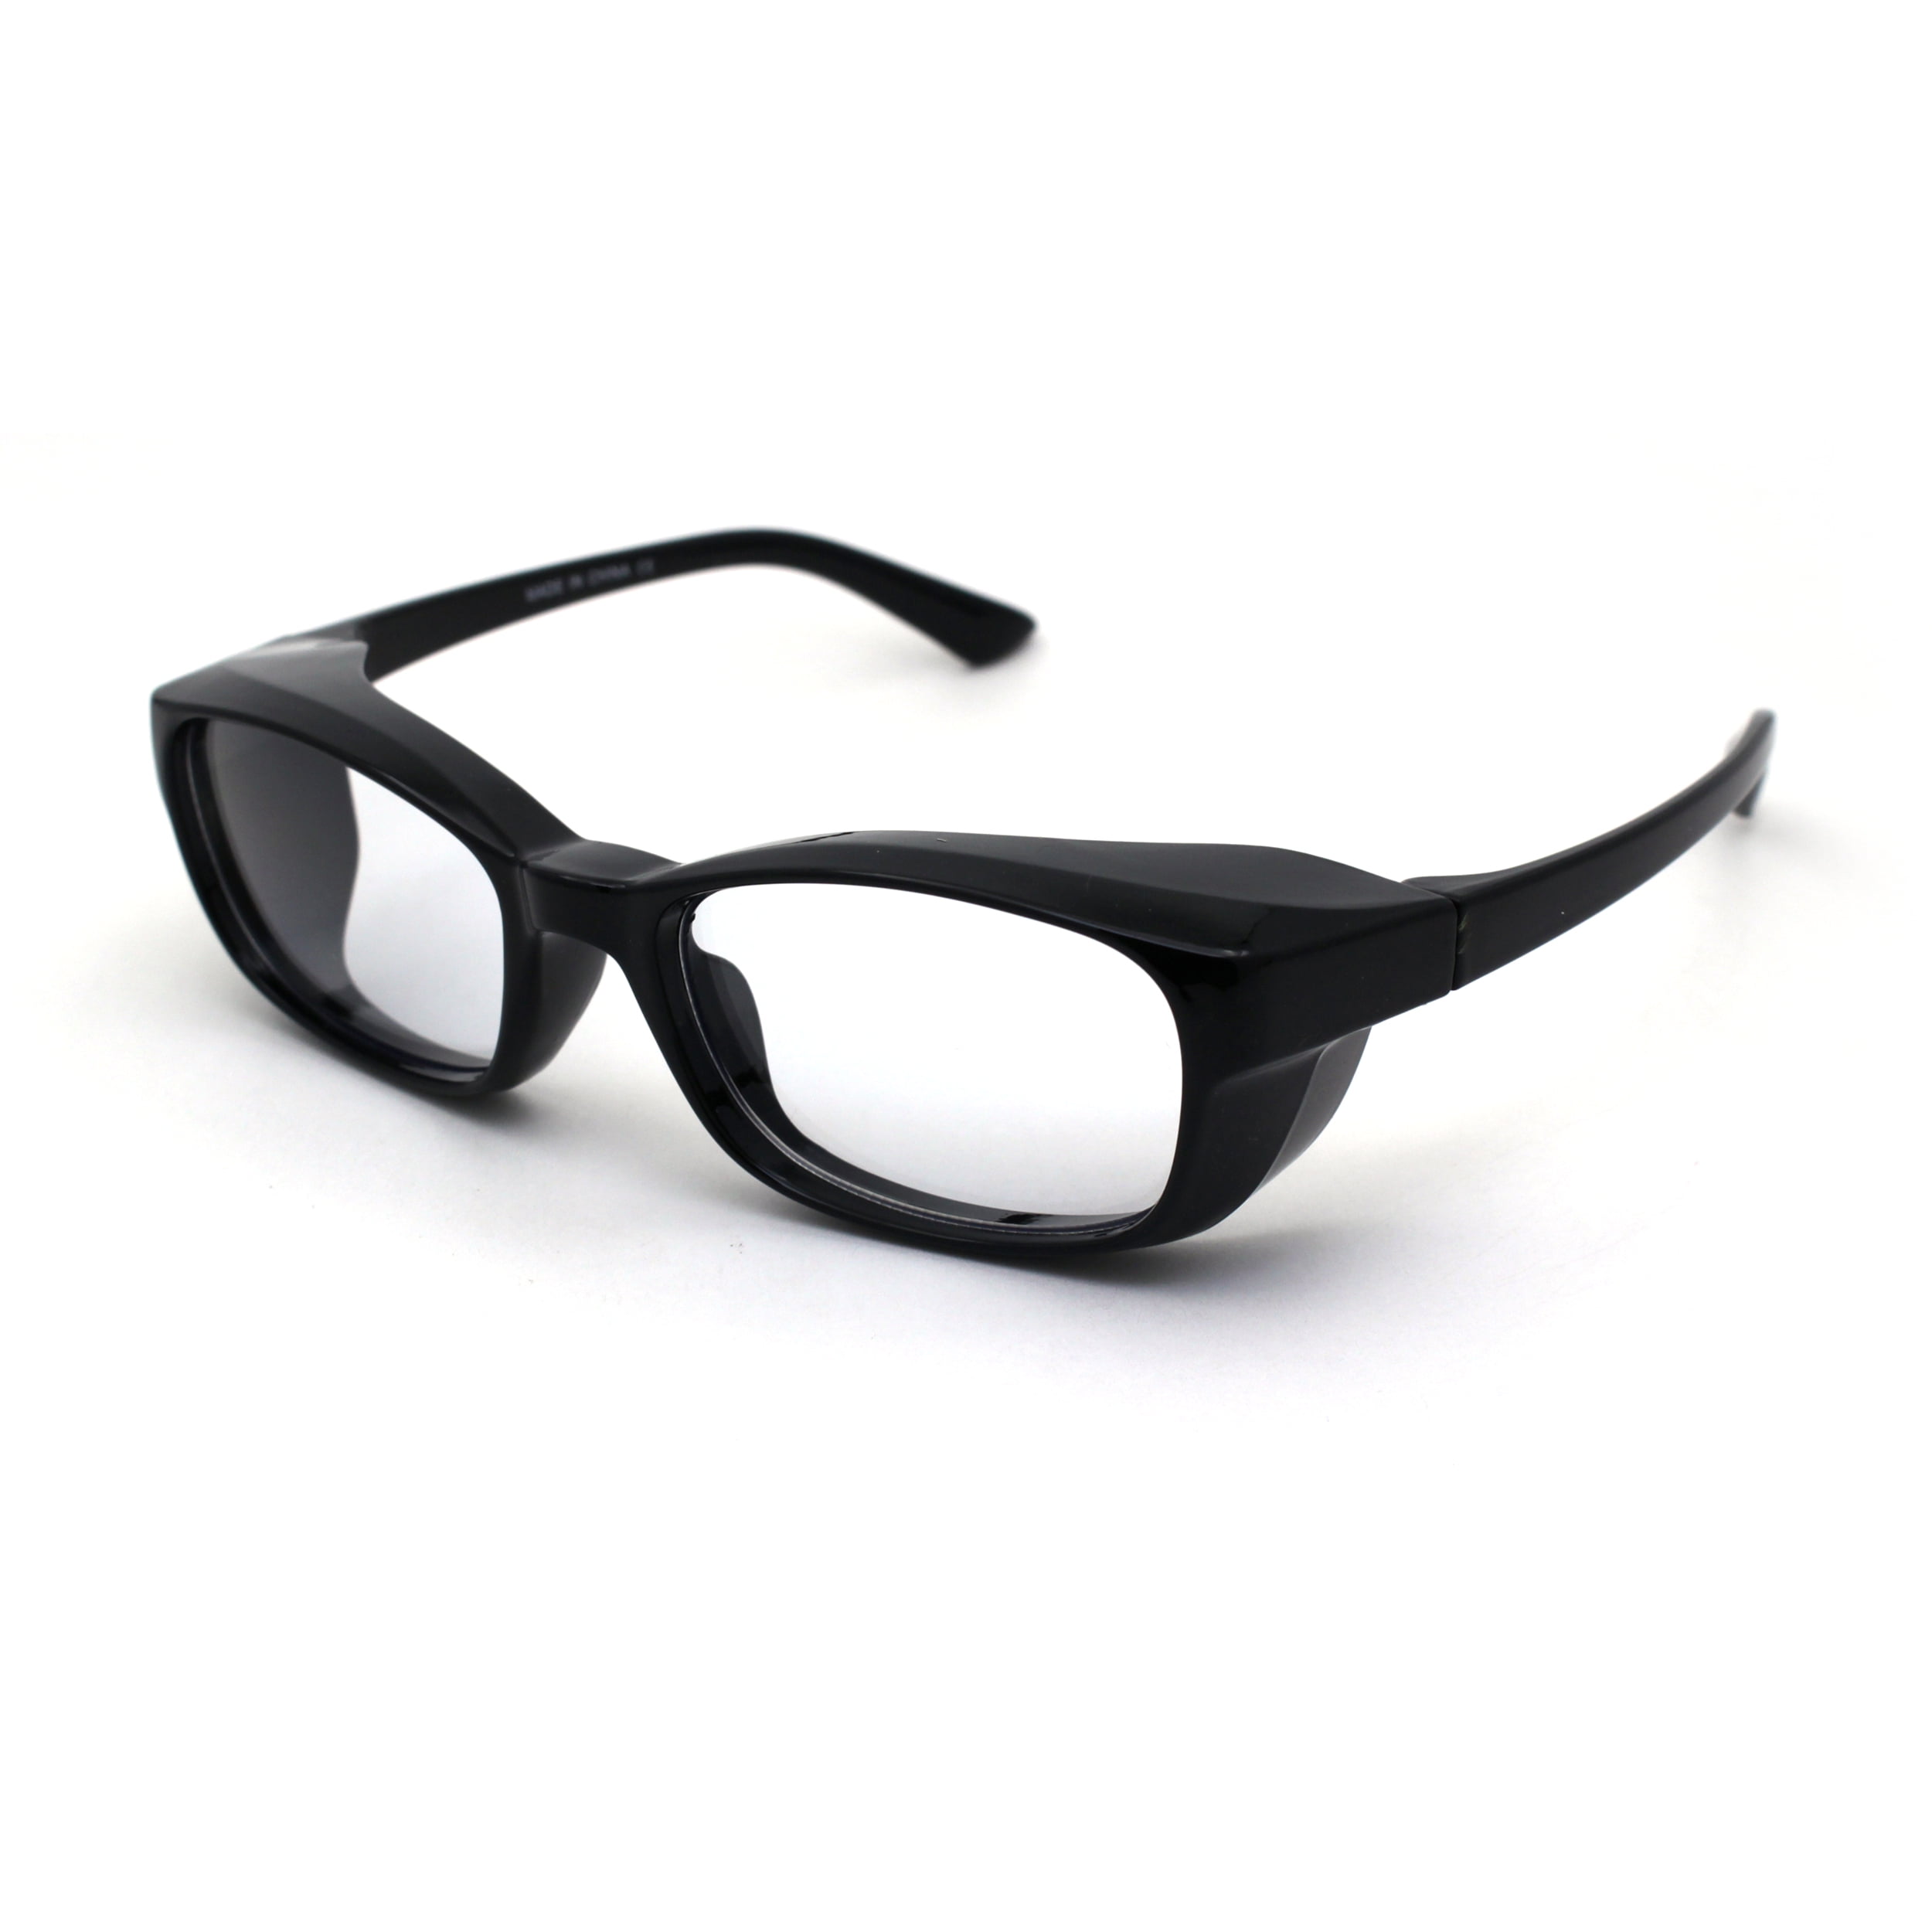 Radiation Safety Fitover Glasses w/ Lightweight Frame Fits Any Style of Glasses 